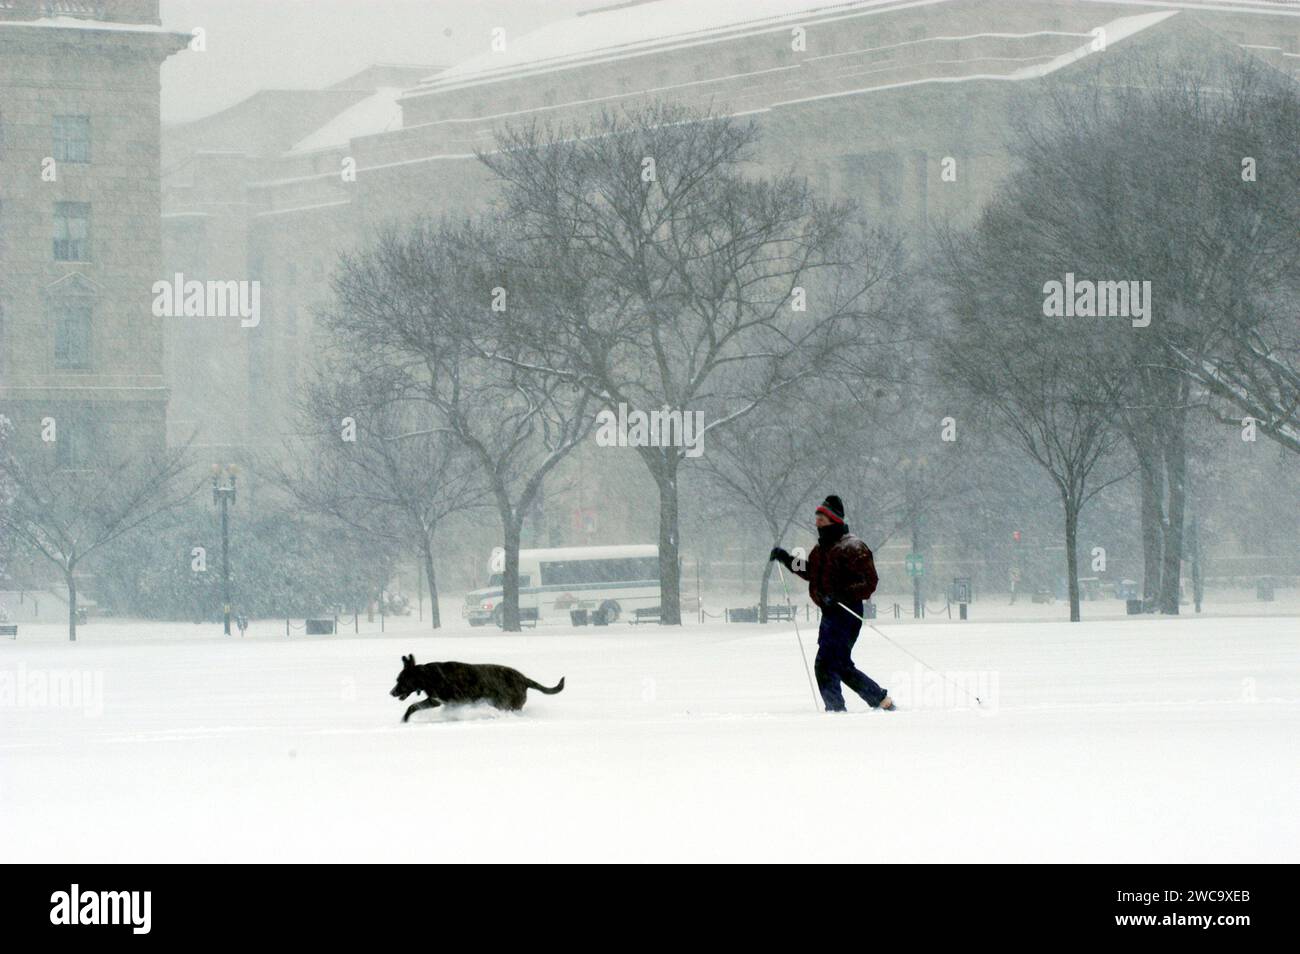 A record-making snowstorm on February 16, 2003, in the nation's capital brought cross-country skiers out to the National Mall to enjoy the heavy accumulation of snow. Stock Photo